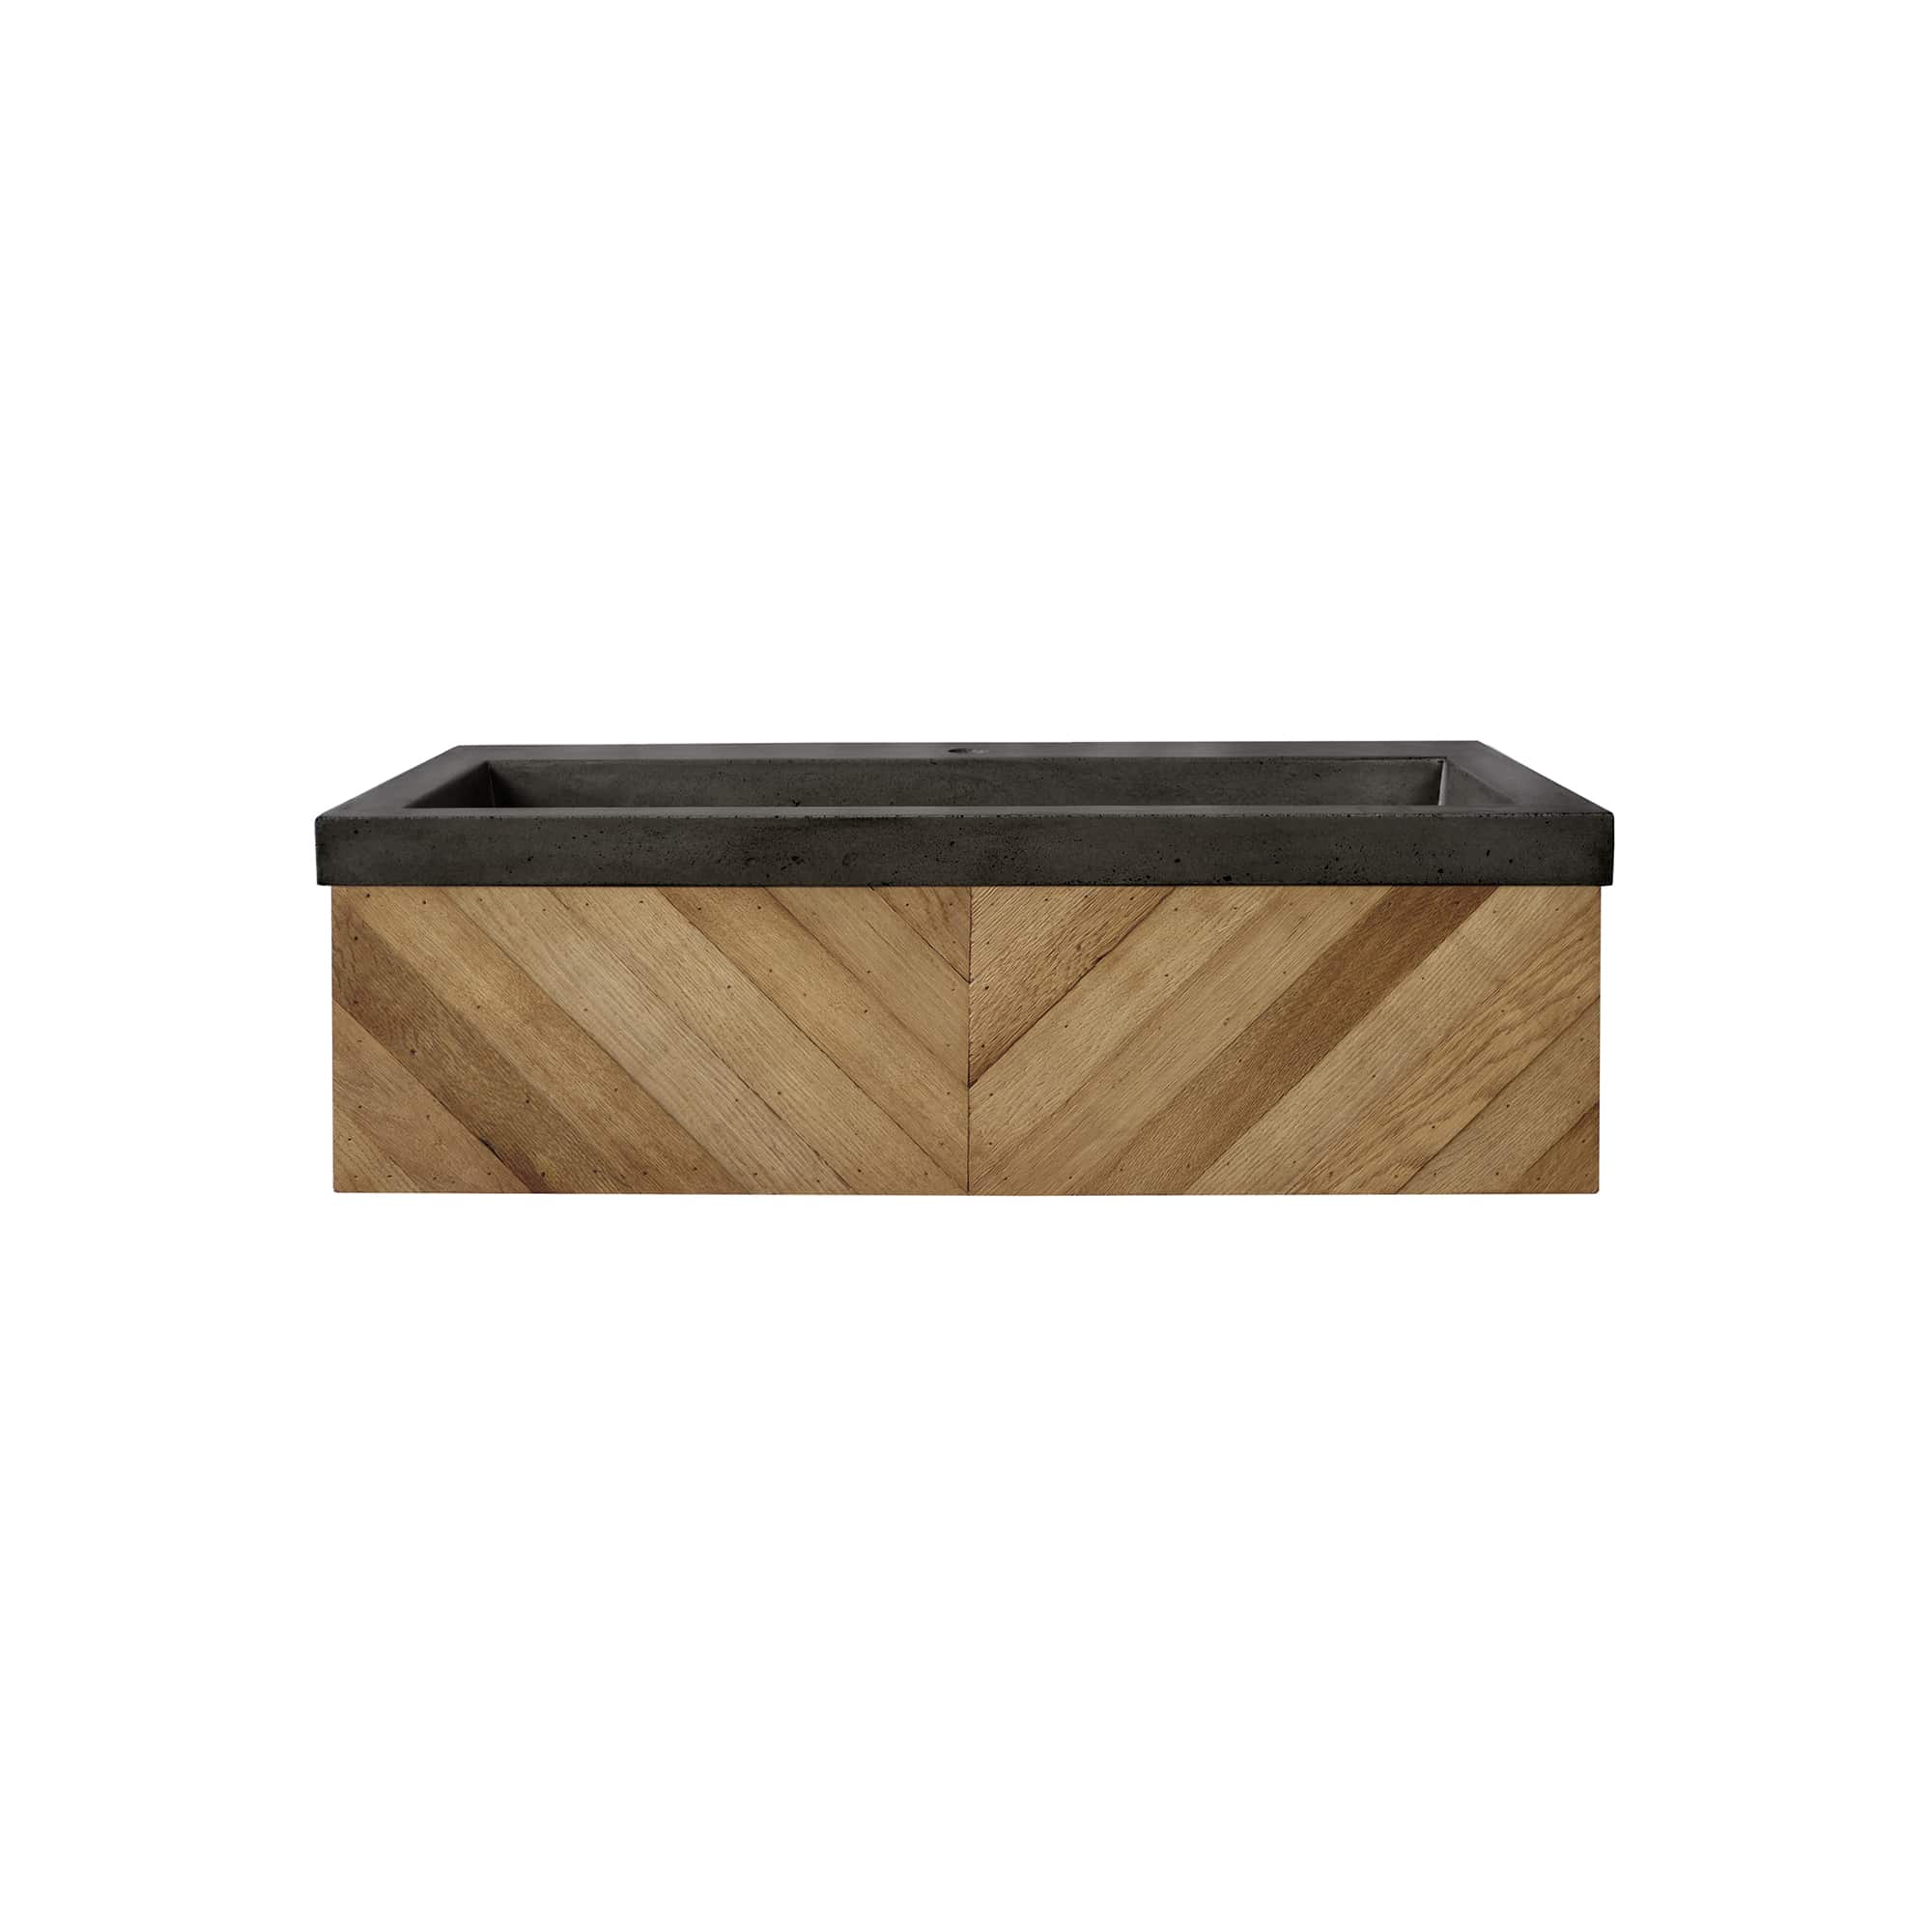 Native Trails 36 inches chardonnay floating vanity with nativestone trough in slate vnw191-nsl3619-s